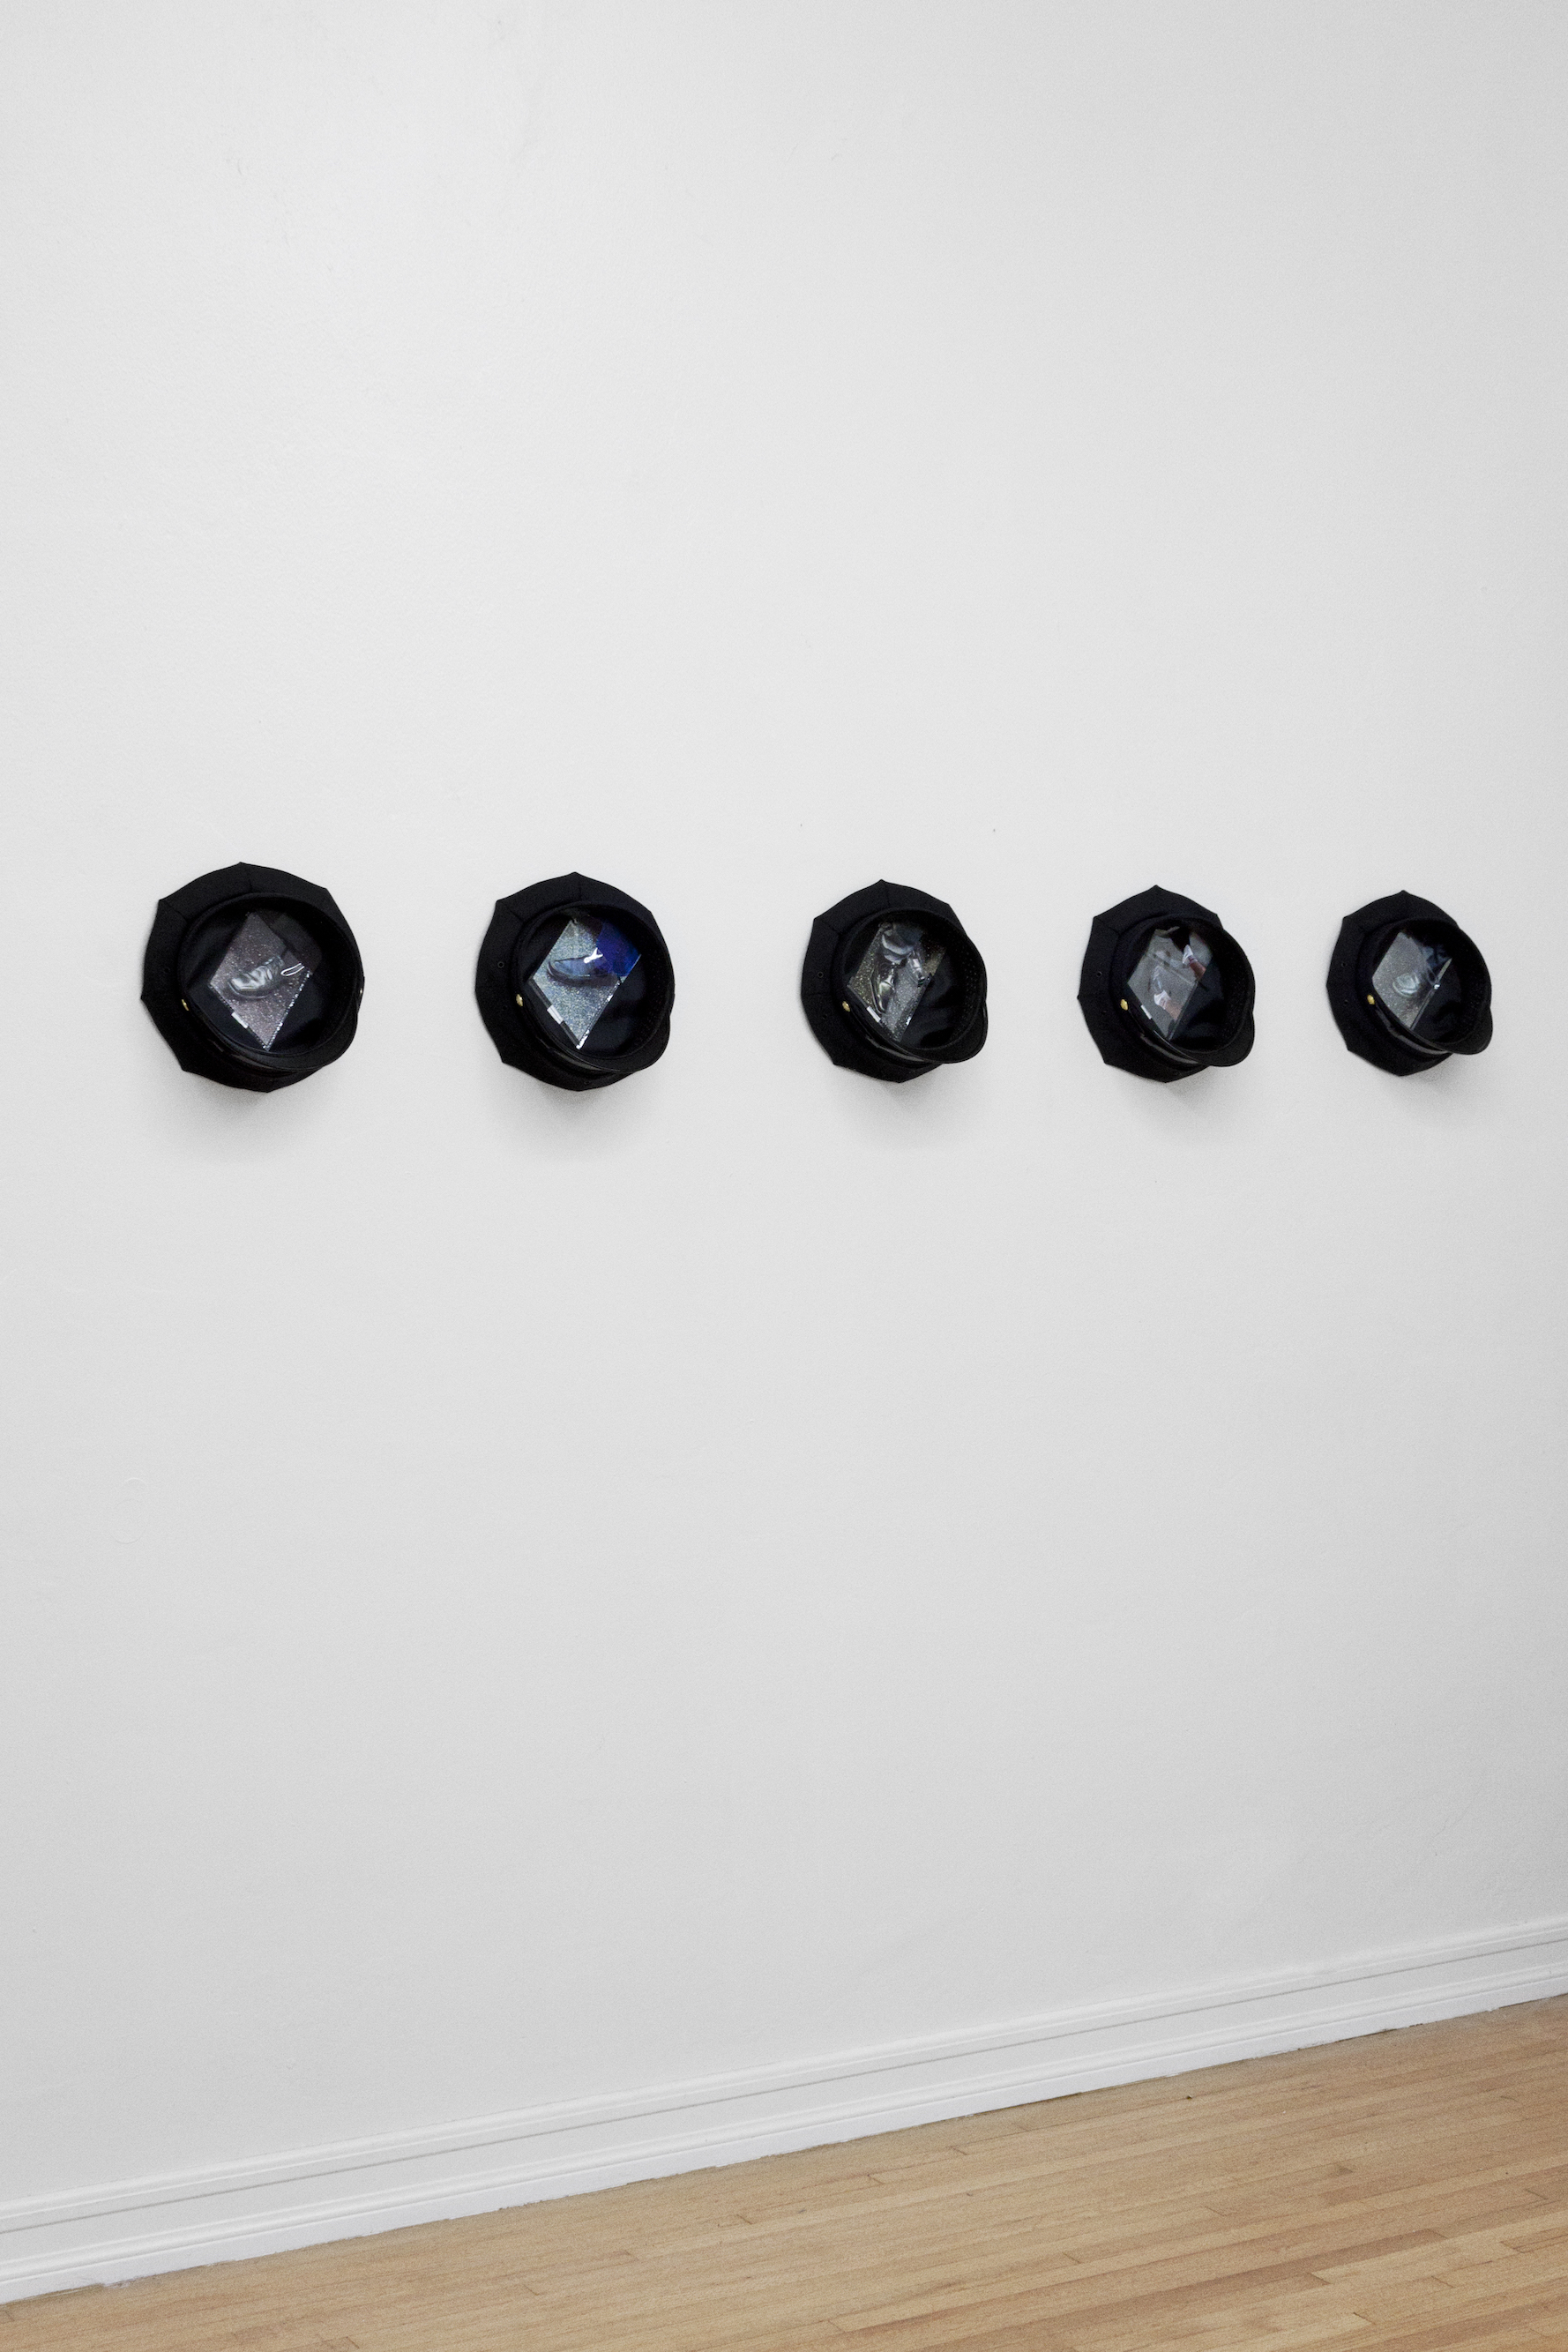 Under Their Hats, 2017 (install view) Suite of 5 individual works dimensions variable